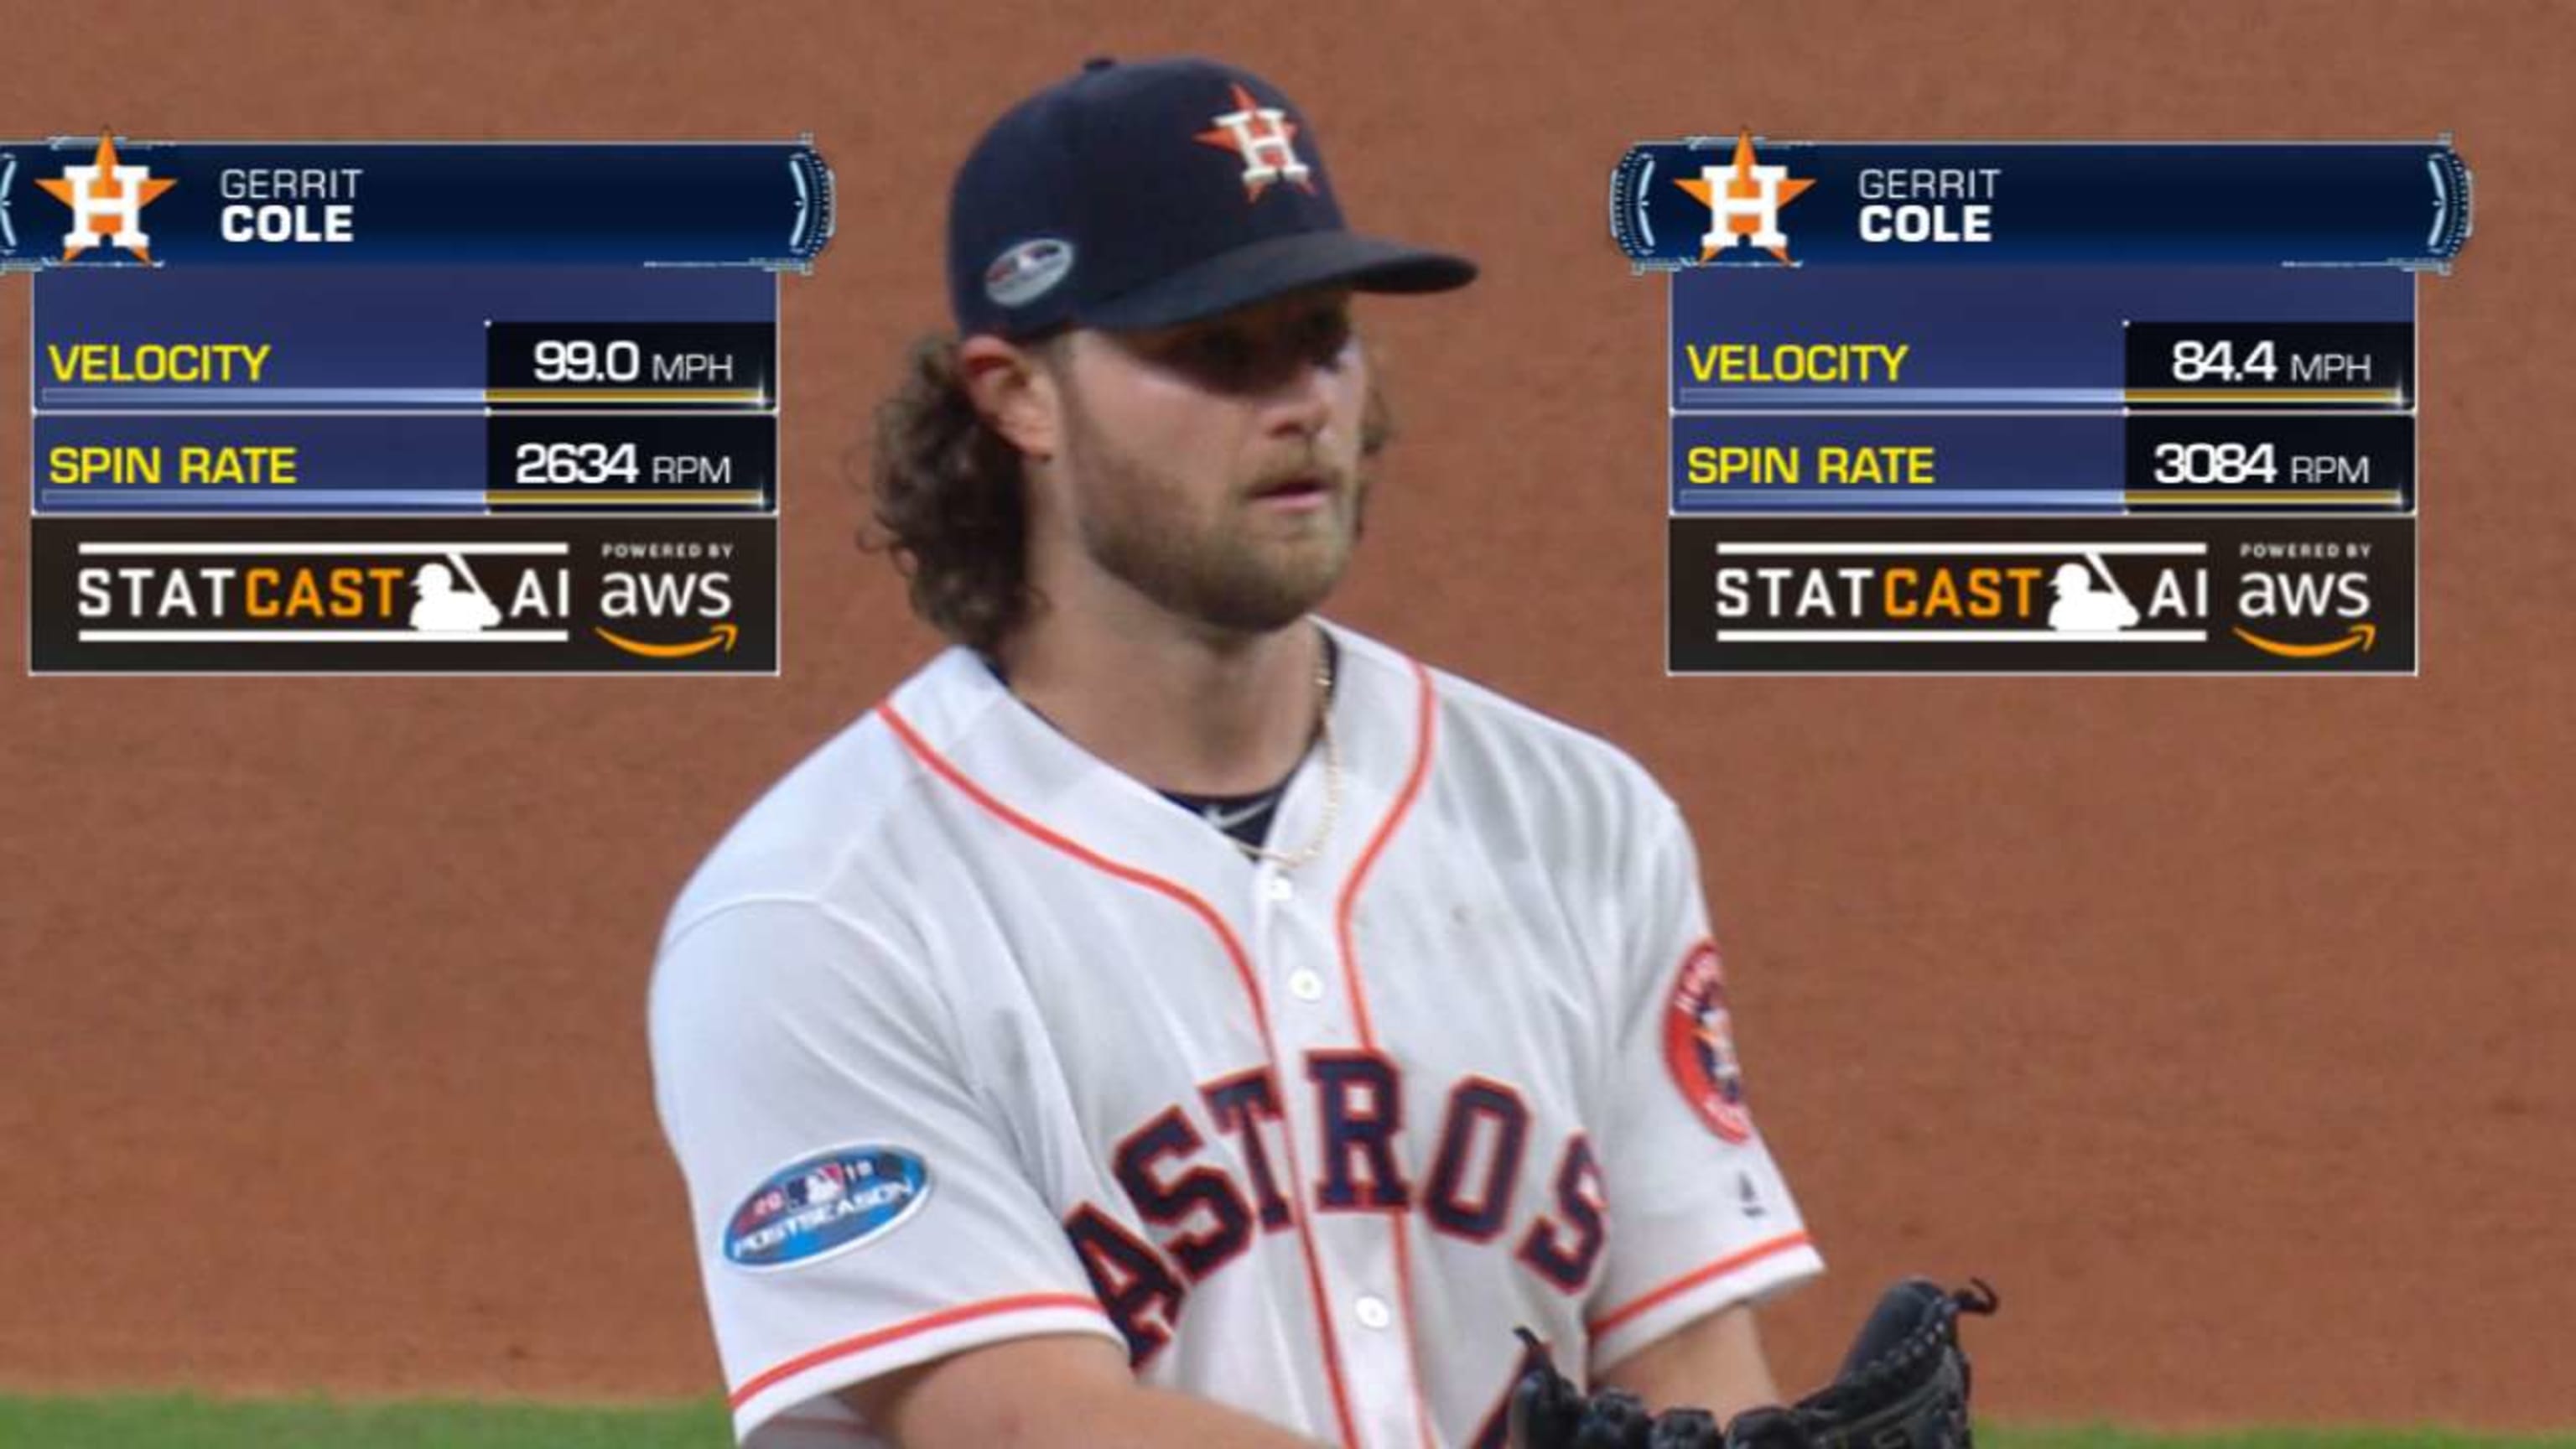 Gerrit Cole DOMINATES the Orioles with 13 Strikeouts! (Including 101 mph  fastball!) 